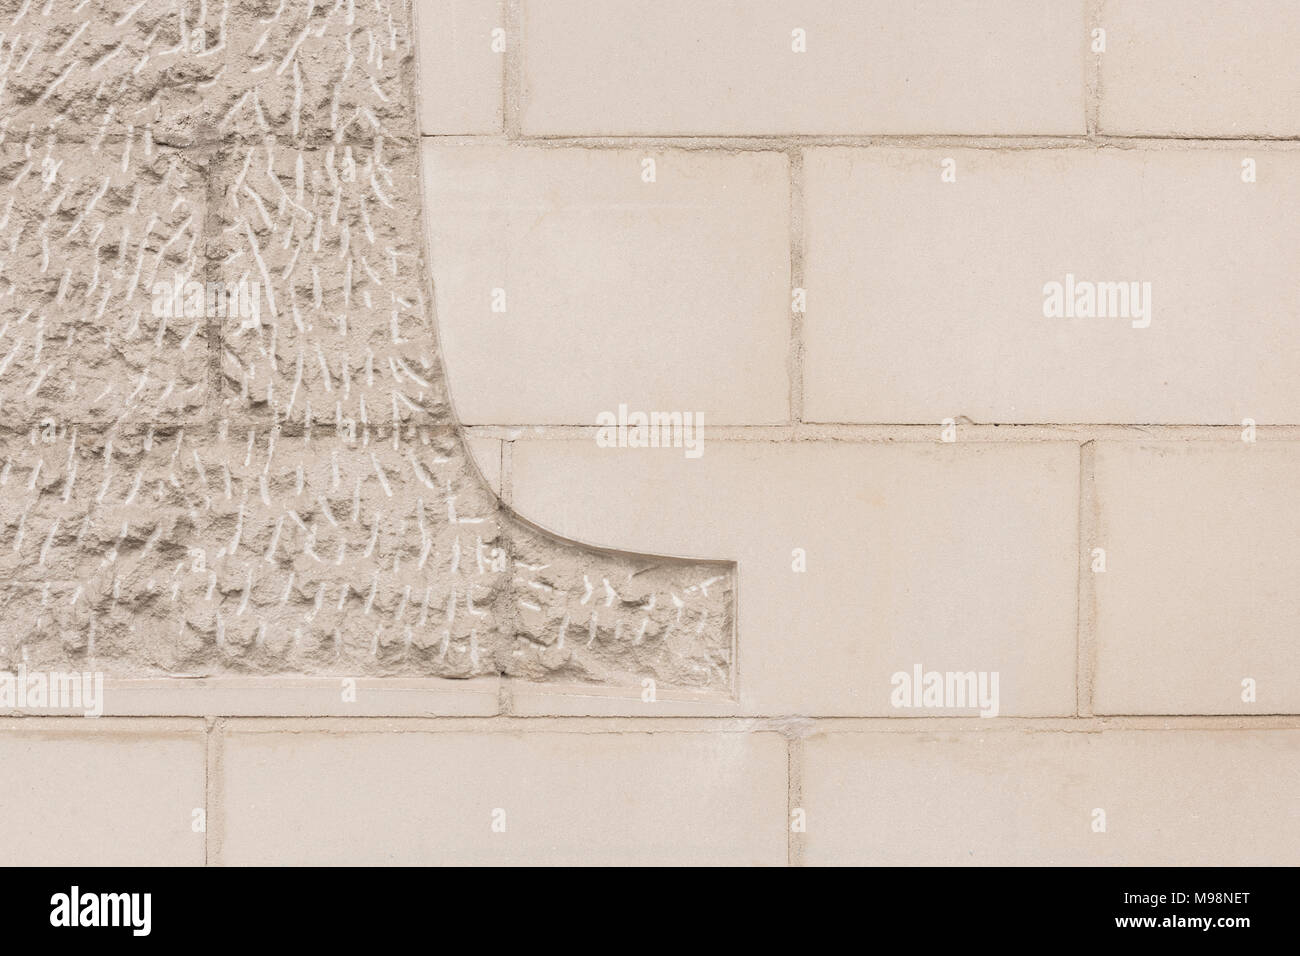 Chiselled / chased limestone facade texture. Stock Photo